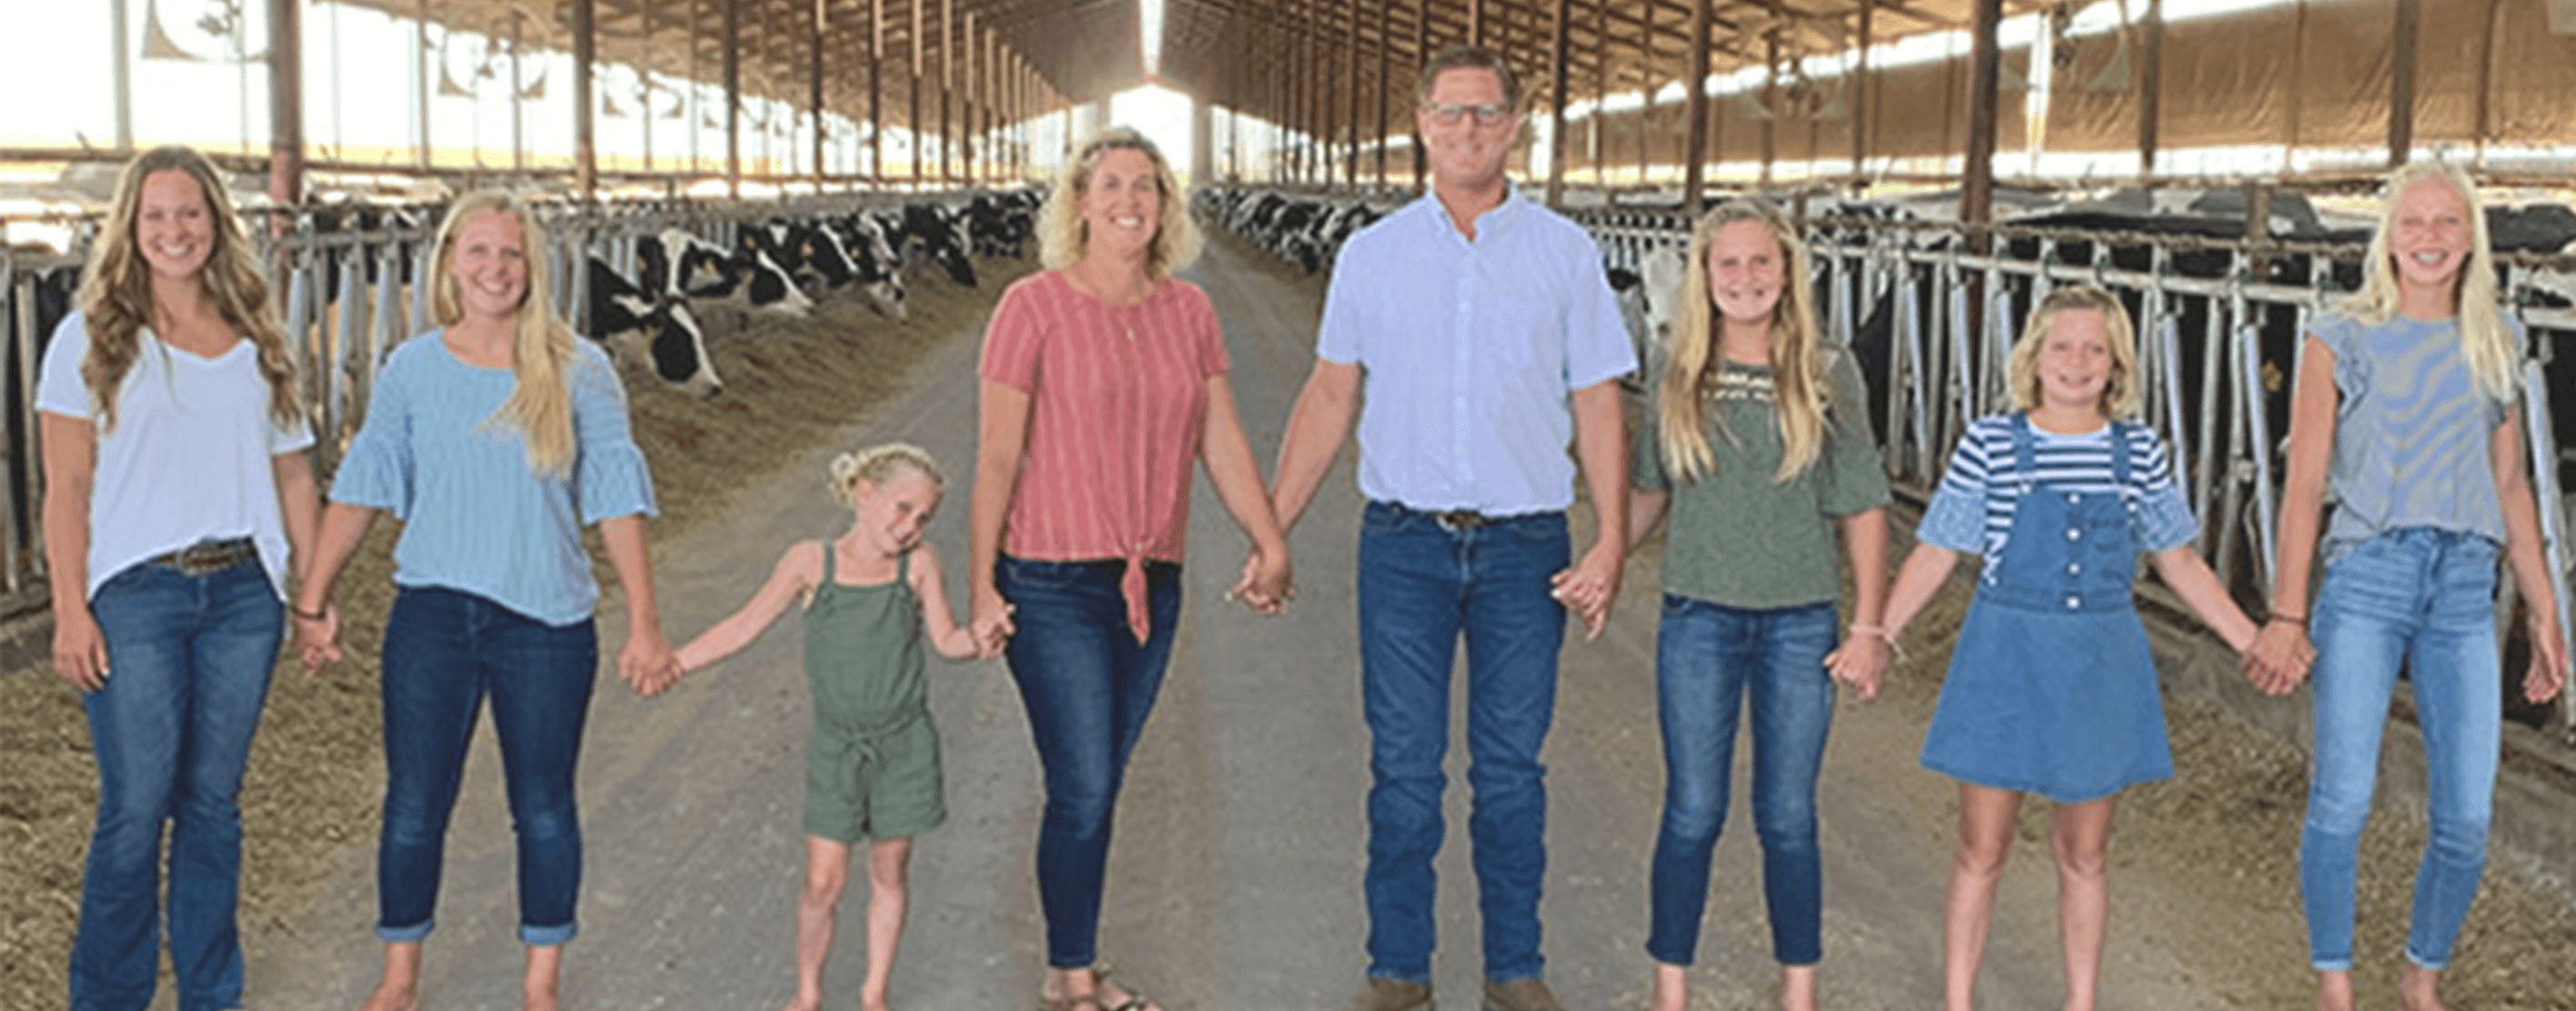 A Family Of Famers Together In A Barn